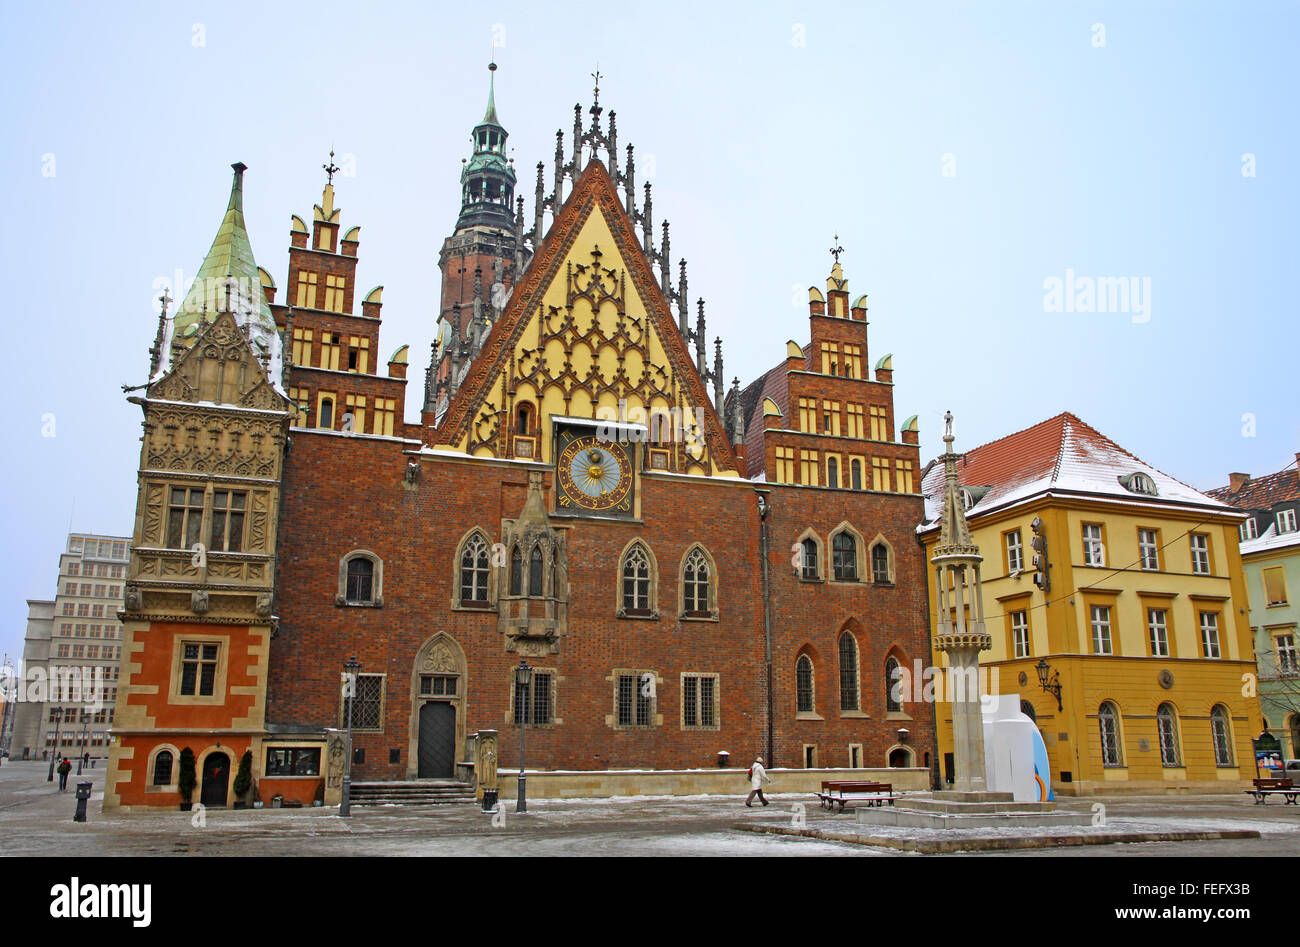 Market square and facade of Town Hall in Wroclaw city, Poland Stock Photo